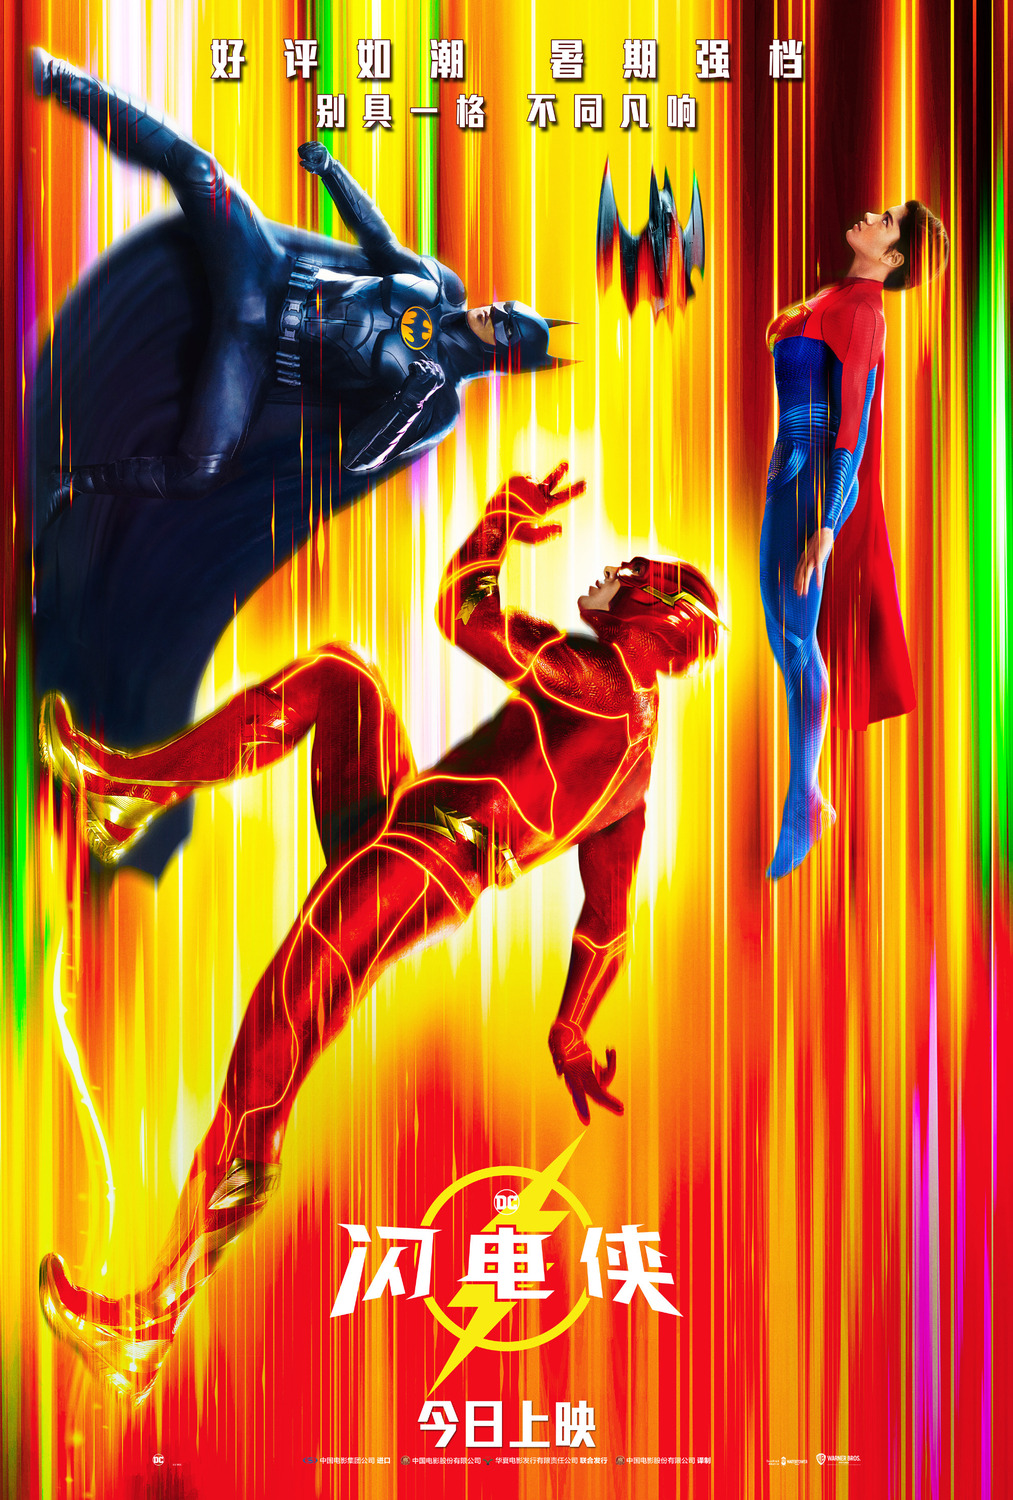 Extra Large Movie Poster Image for The Flash (#18 of 18)